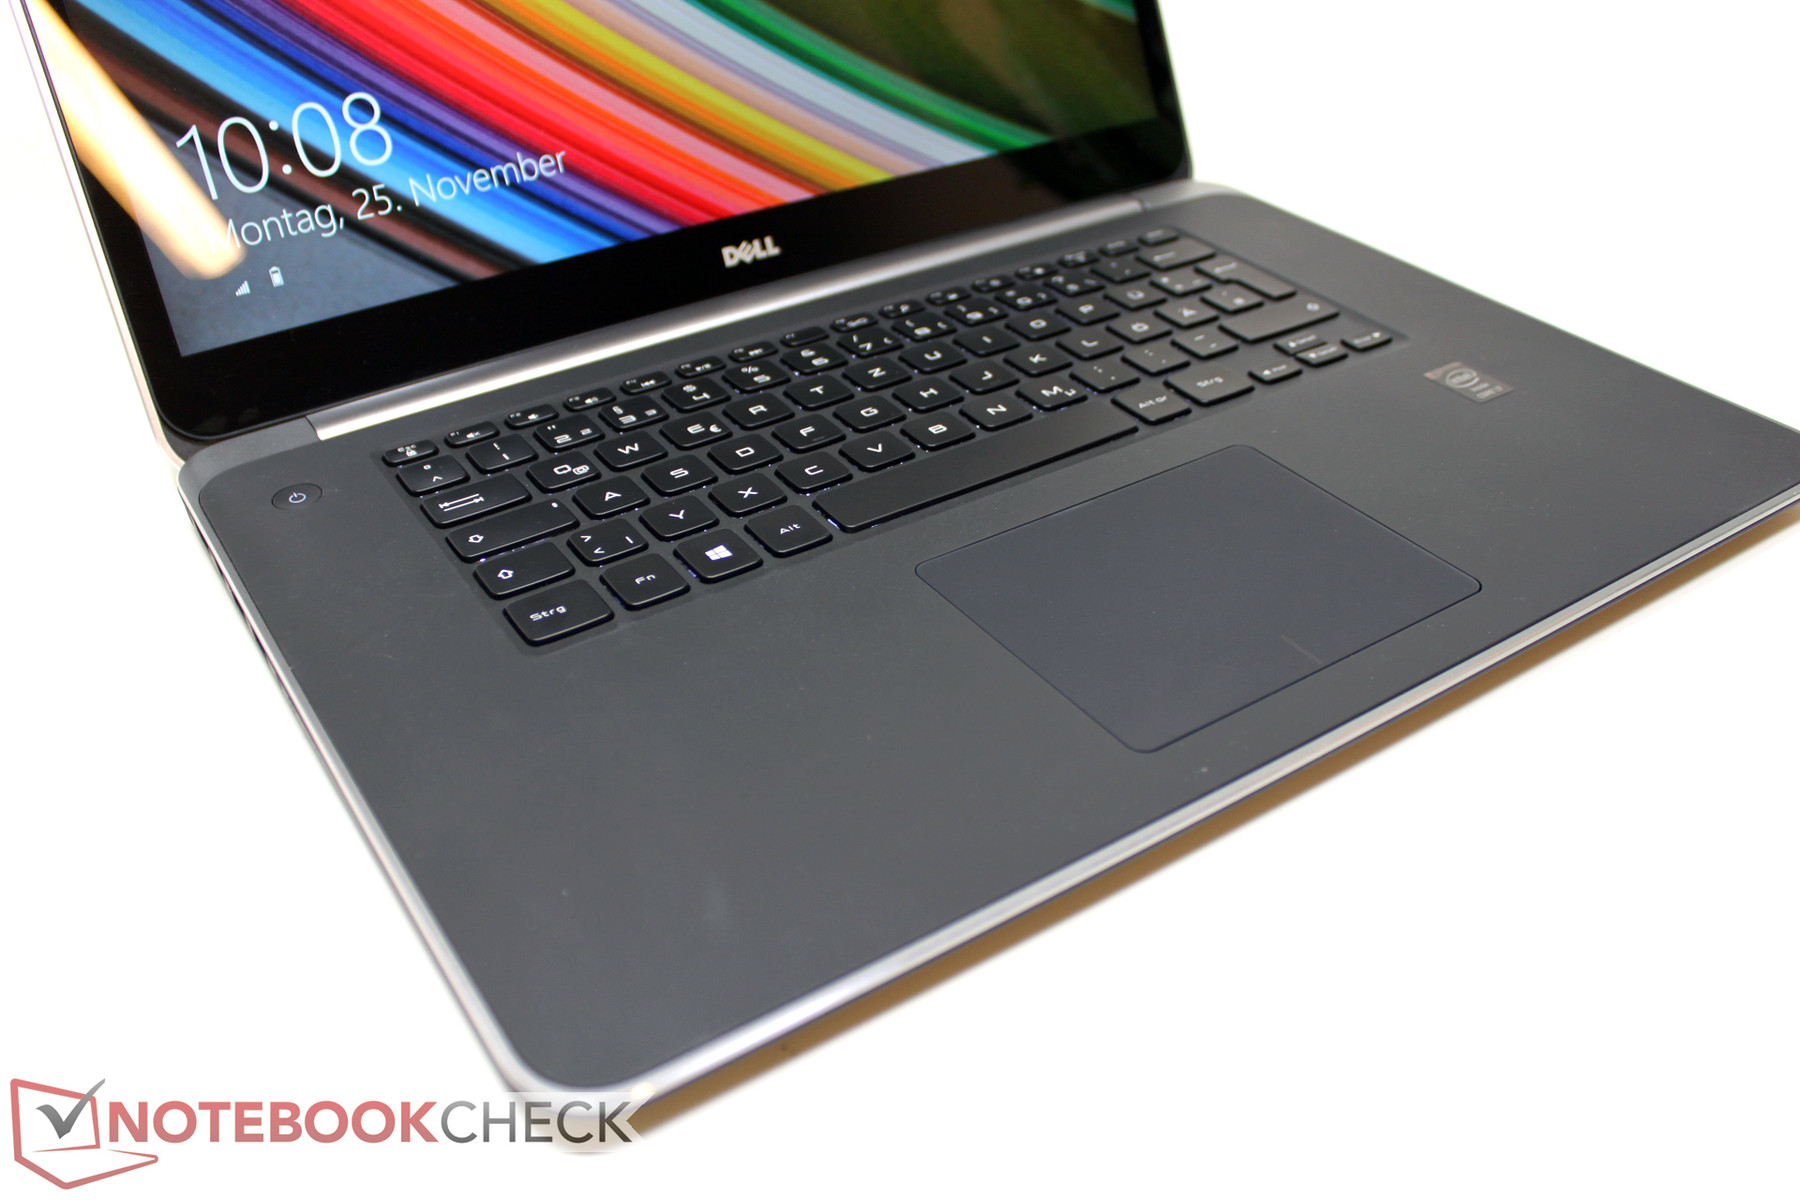 Dell XPS 15 9530 Review: A Beautiful, Power-Efficient Laptop - Page 3